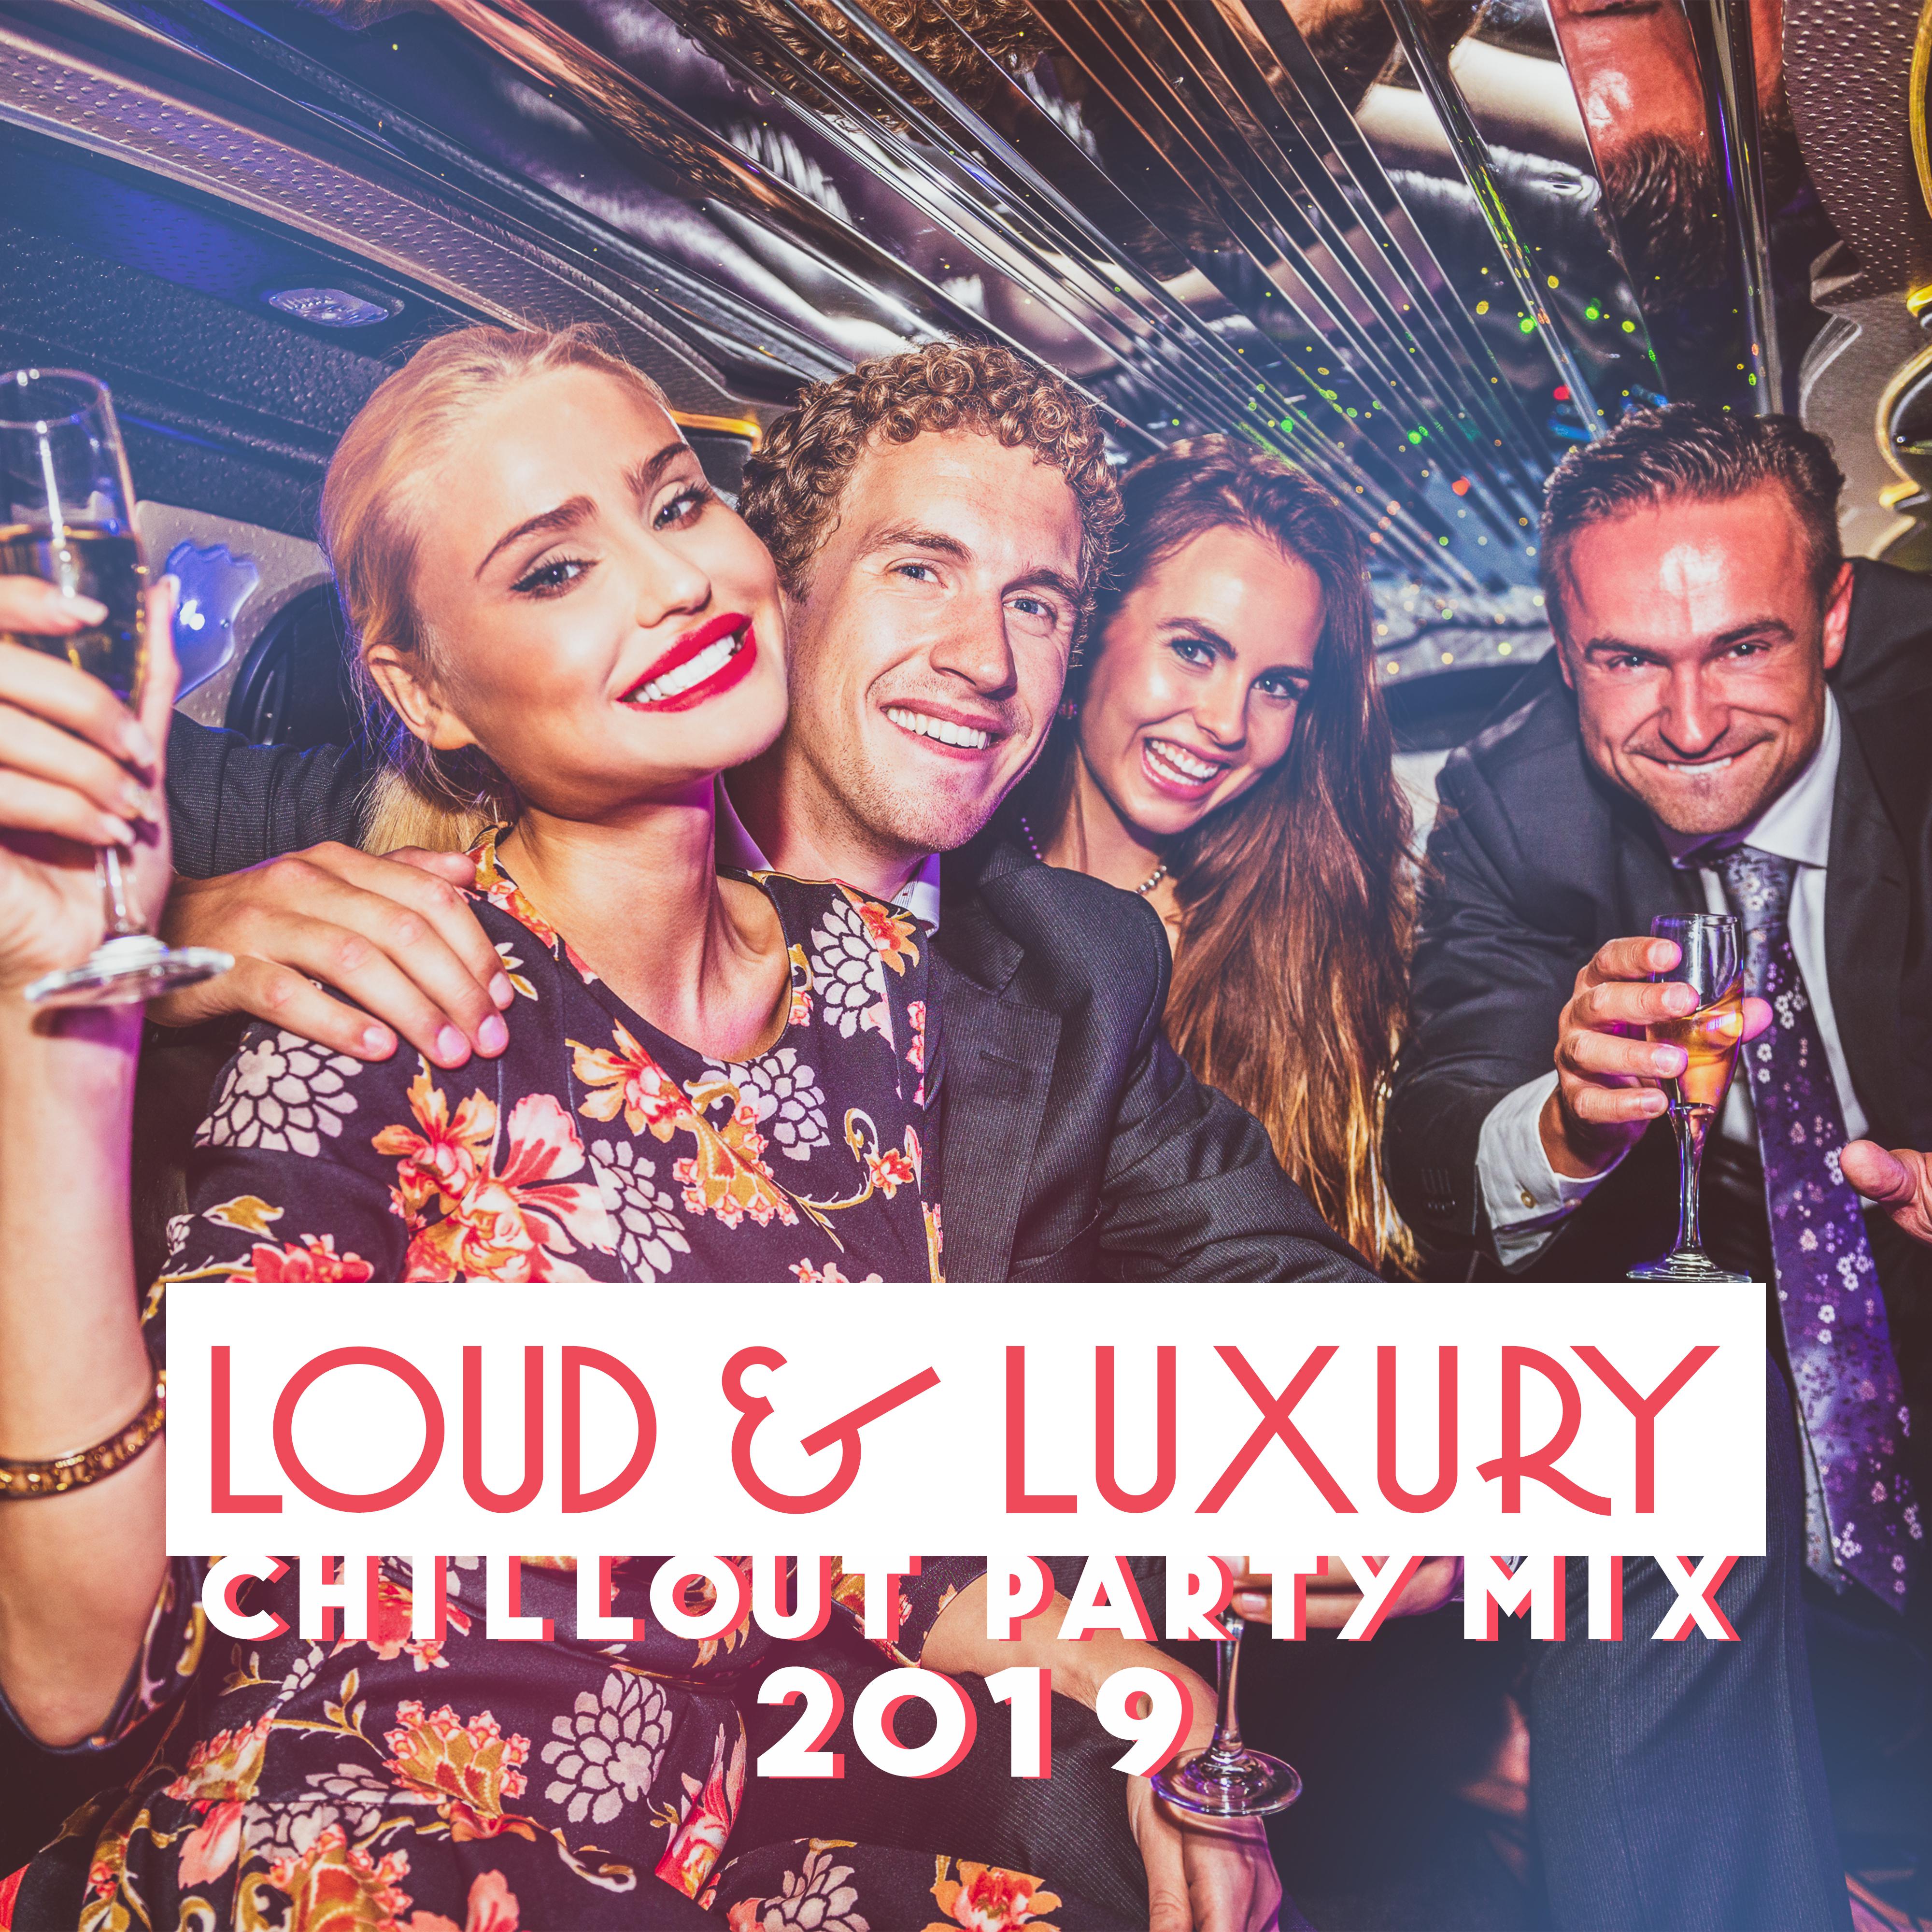 Loud & Luxury Chillout Party Mix 2019 – Compilation of Best Electronic Chill Out Slow Music for Pool Party, Beach Party or Elegant Dance Party in the Mansion, Relaxing **** Vibes, Chilled Paradise Lounge